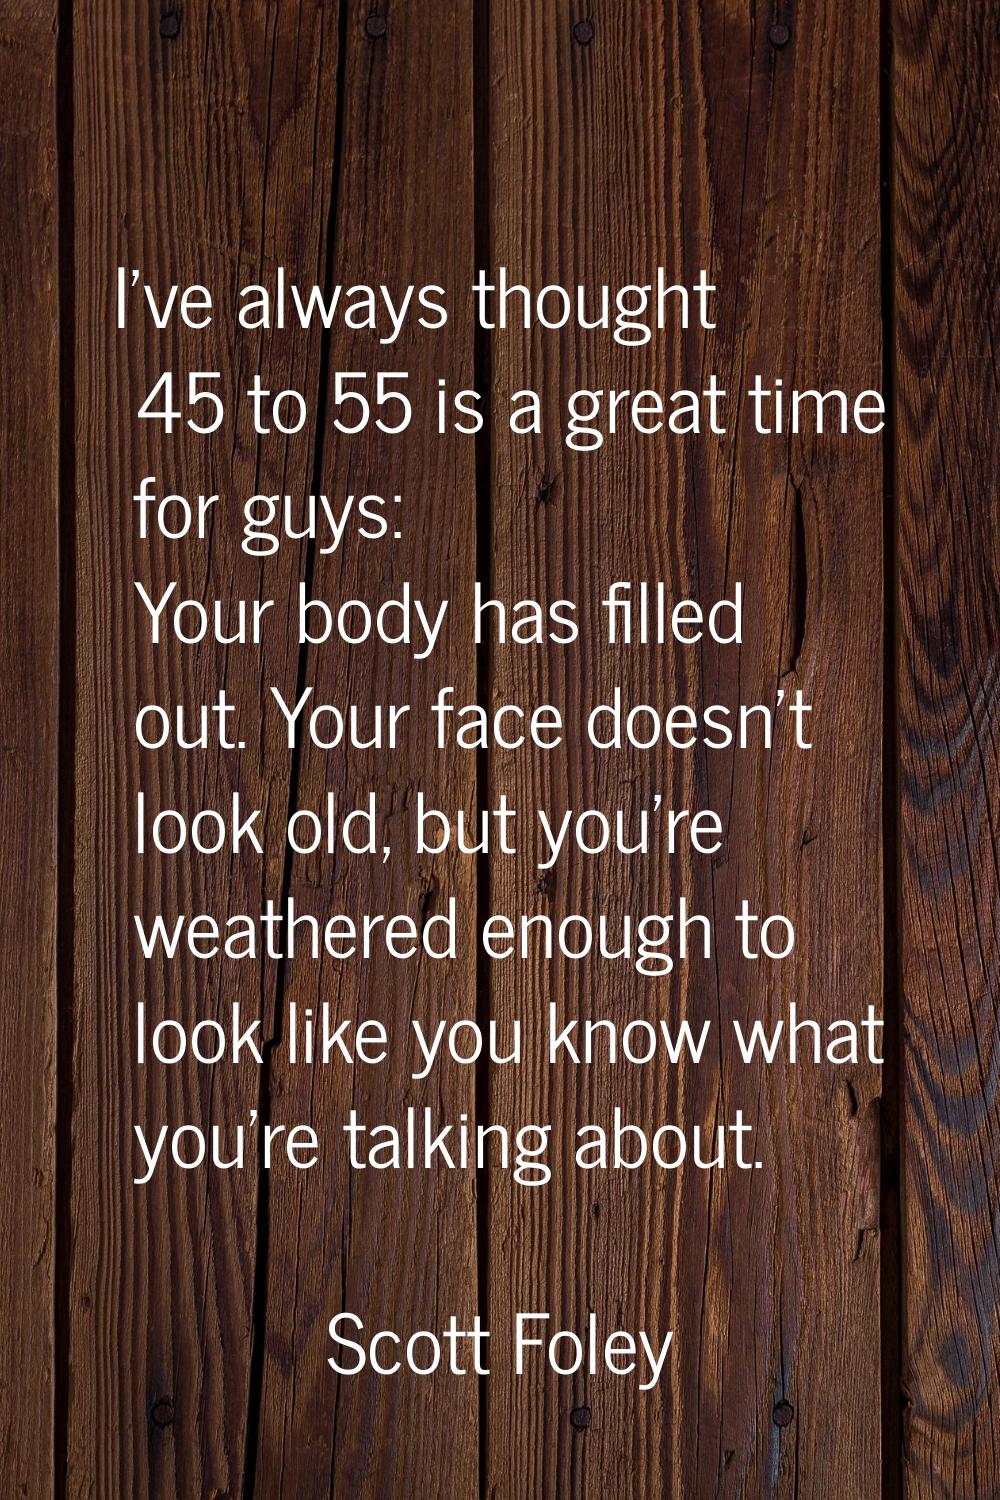 I've always thought 45 to 55 is a great time for guys: Your body has filled out. Your face doesn't 